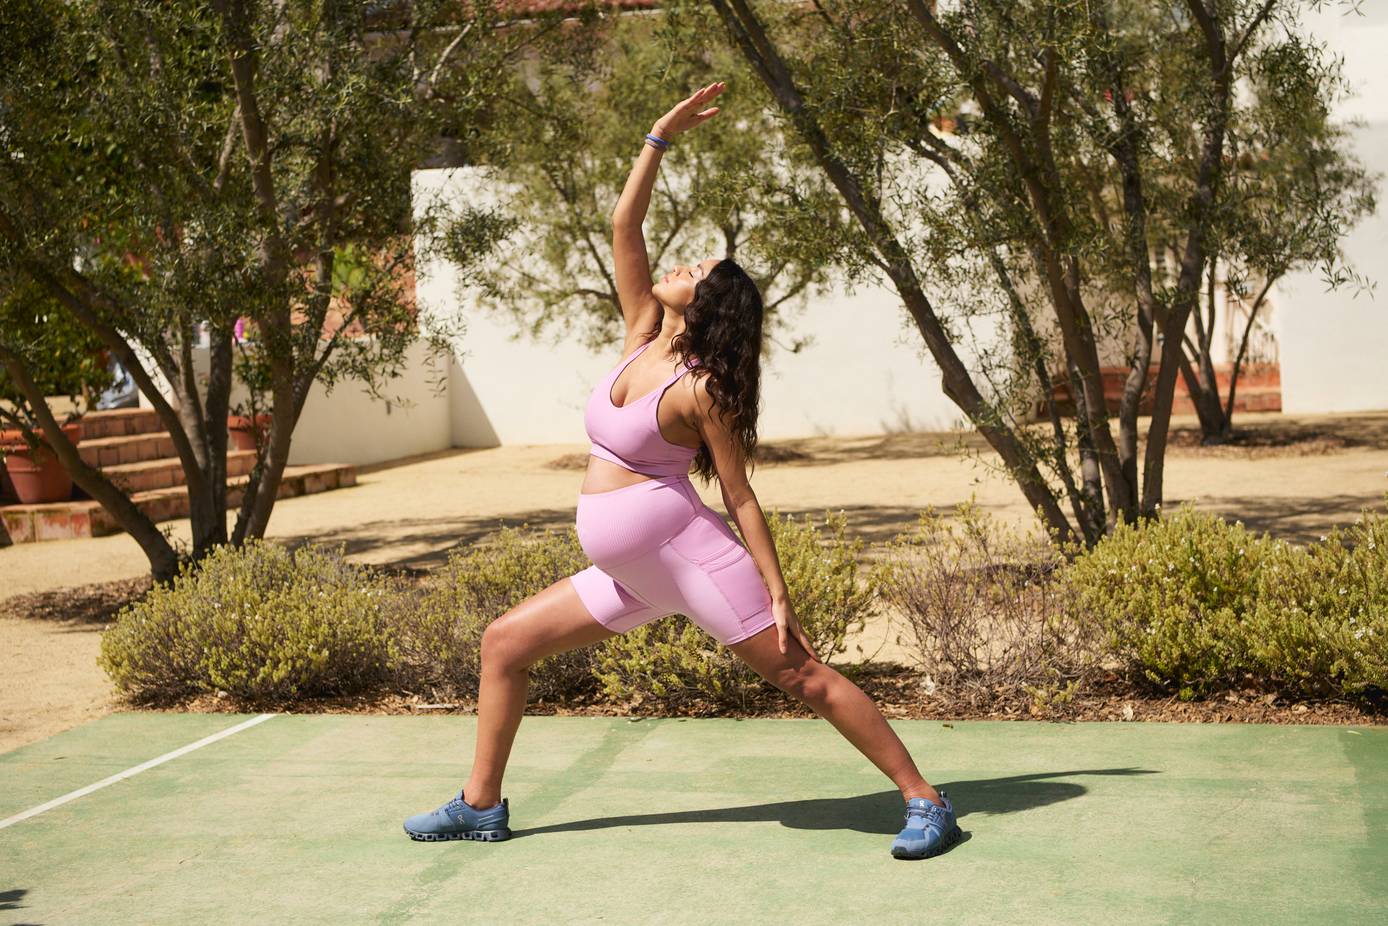 FP Movement and HATCH Launch Maternity Activewear Collection Just in Time  for Mother's Day